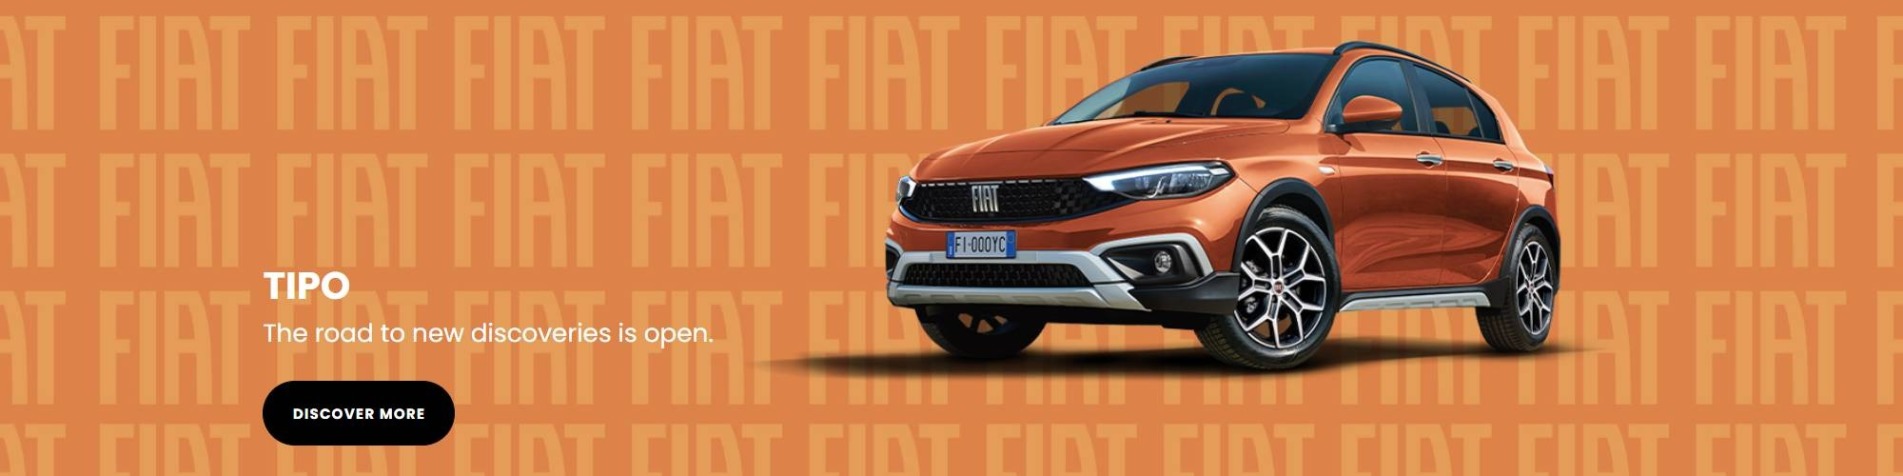 Fiat Tipo Banner